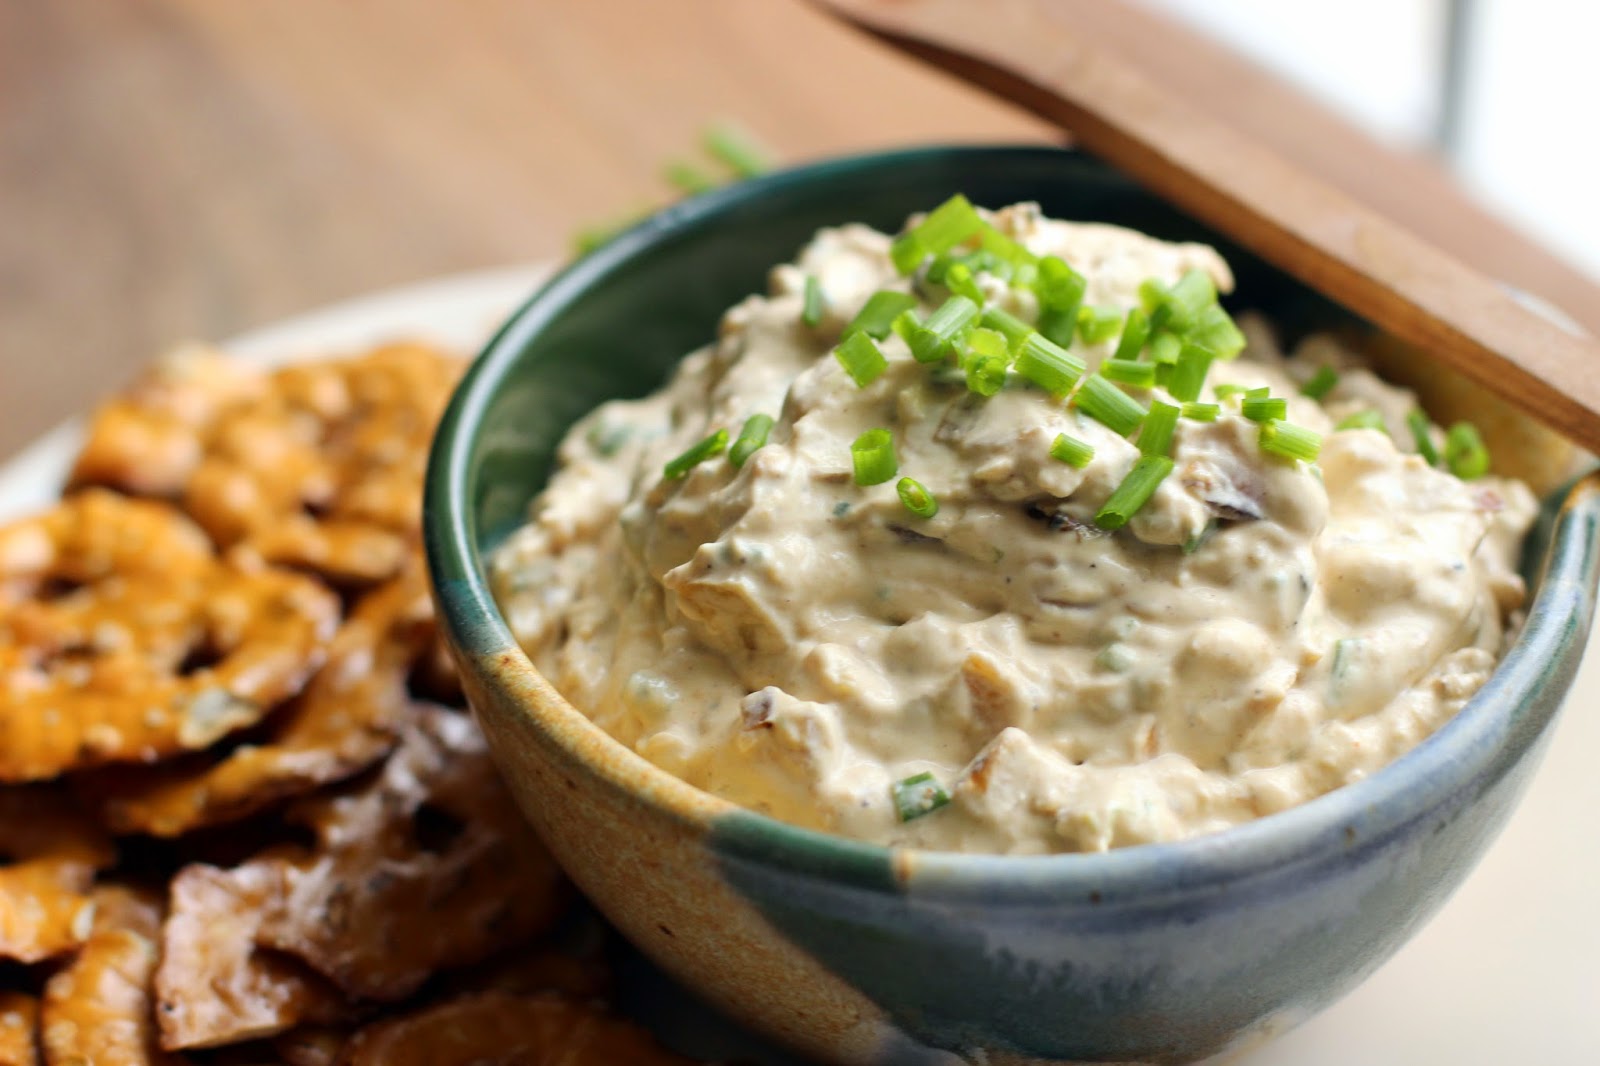 The Owl with the Goblet: Caramelized Onion Dip